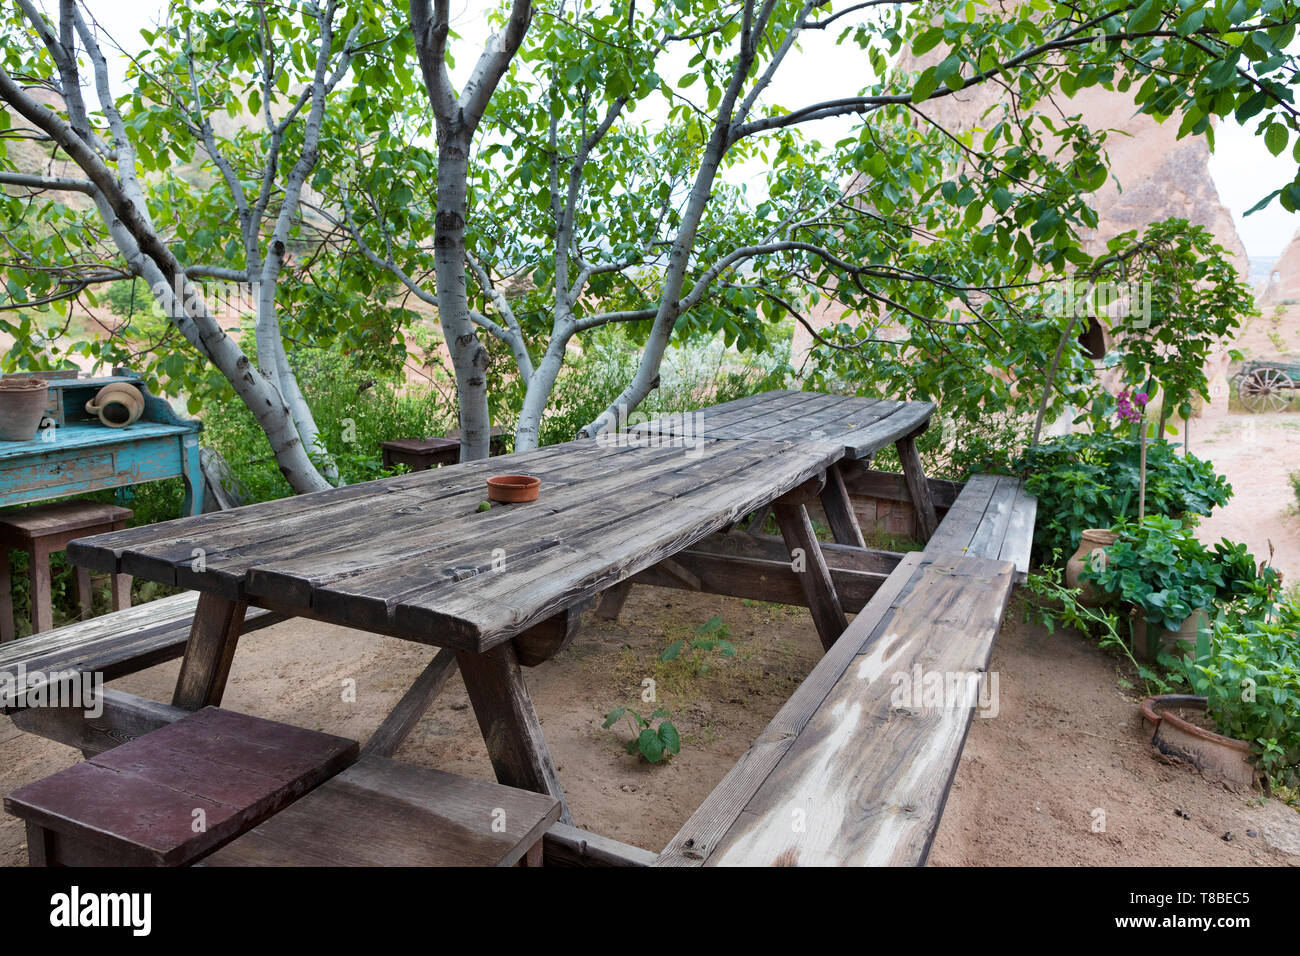 Old dining weathered wooden table and benches in the garden under the almond tree waiting for its owners Stock Photo